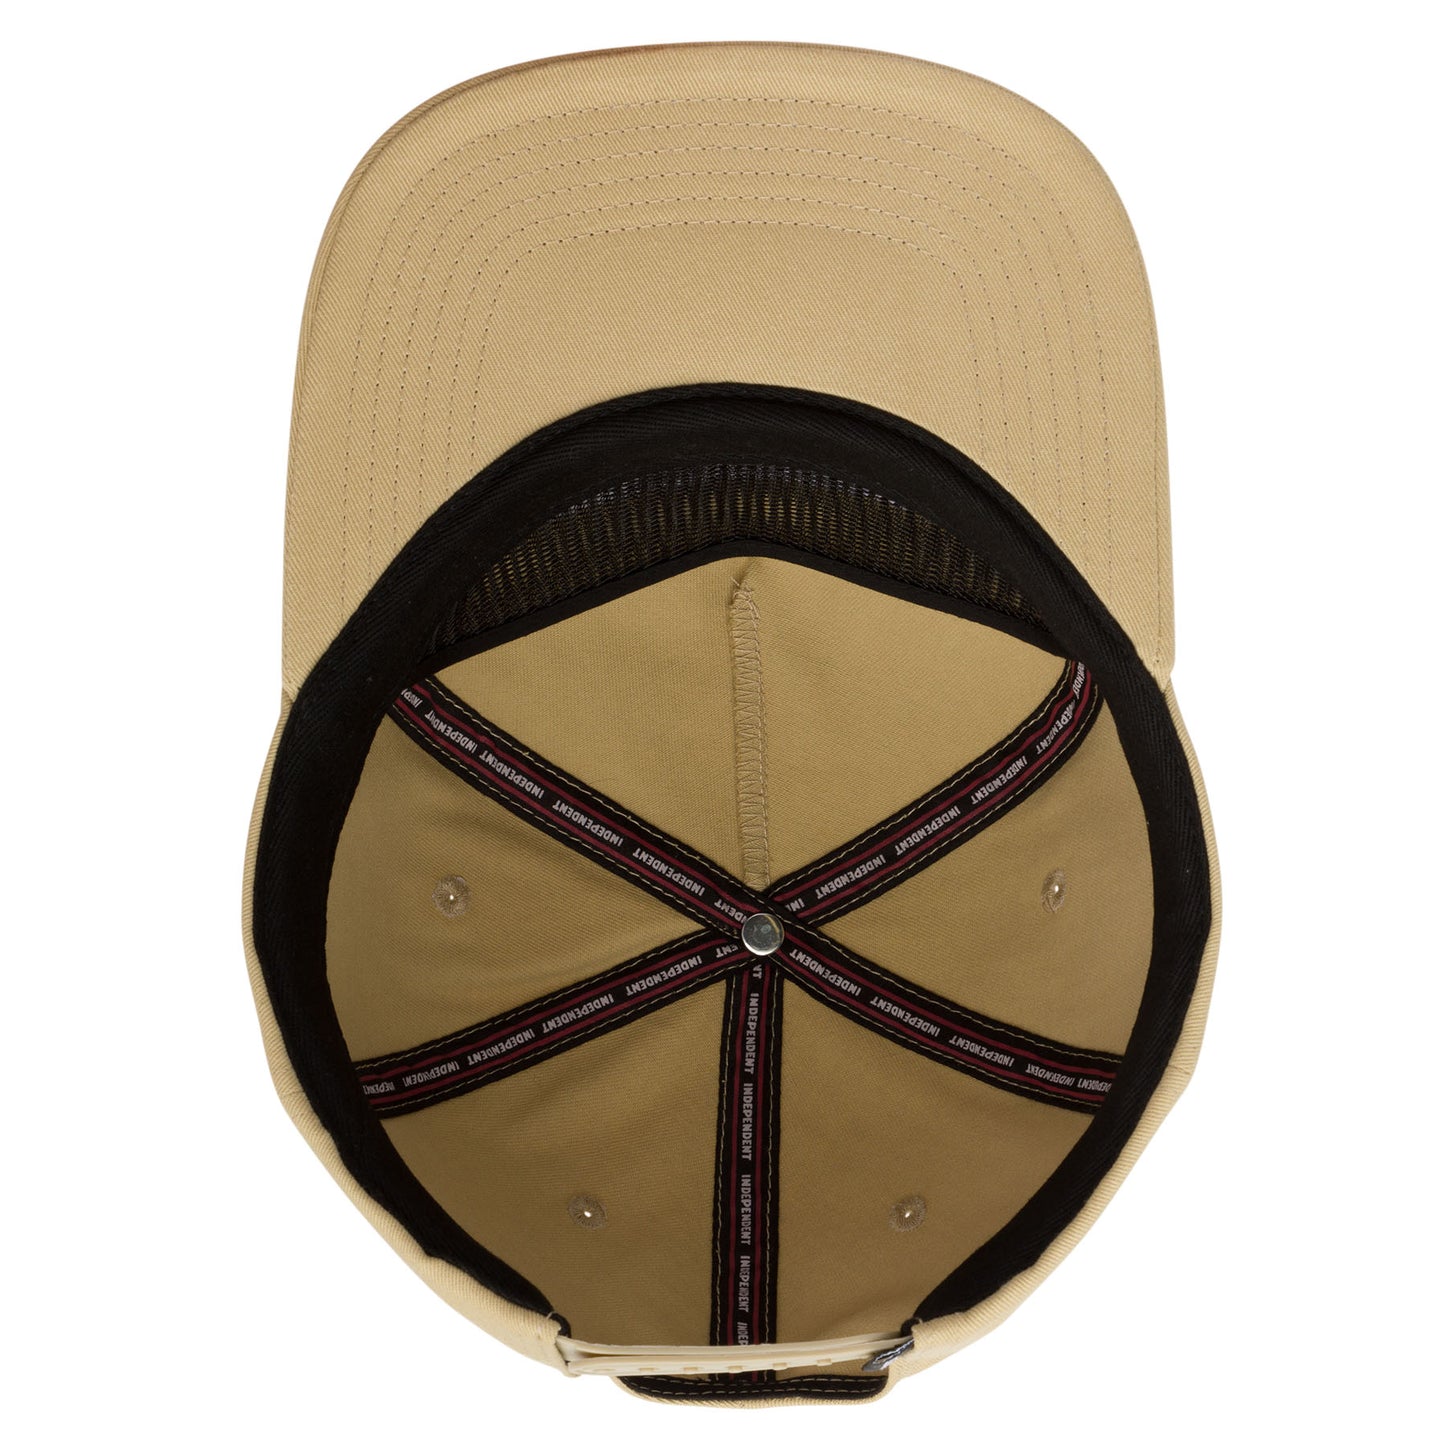 Independent Baseplate Snapback Unstructured Mid Unisex Hat - Tan